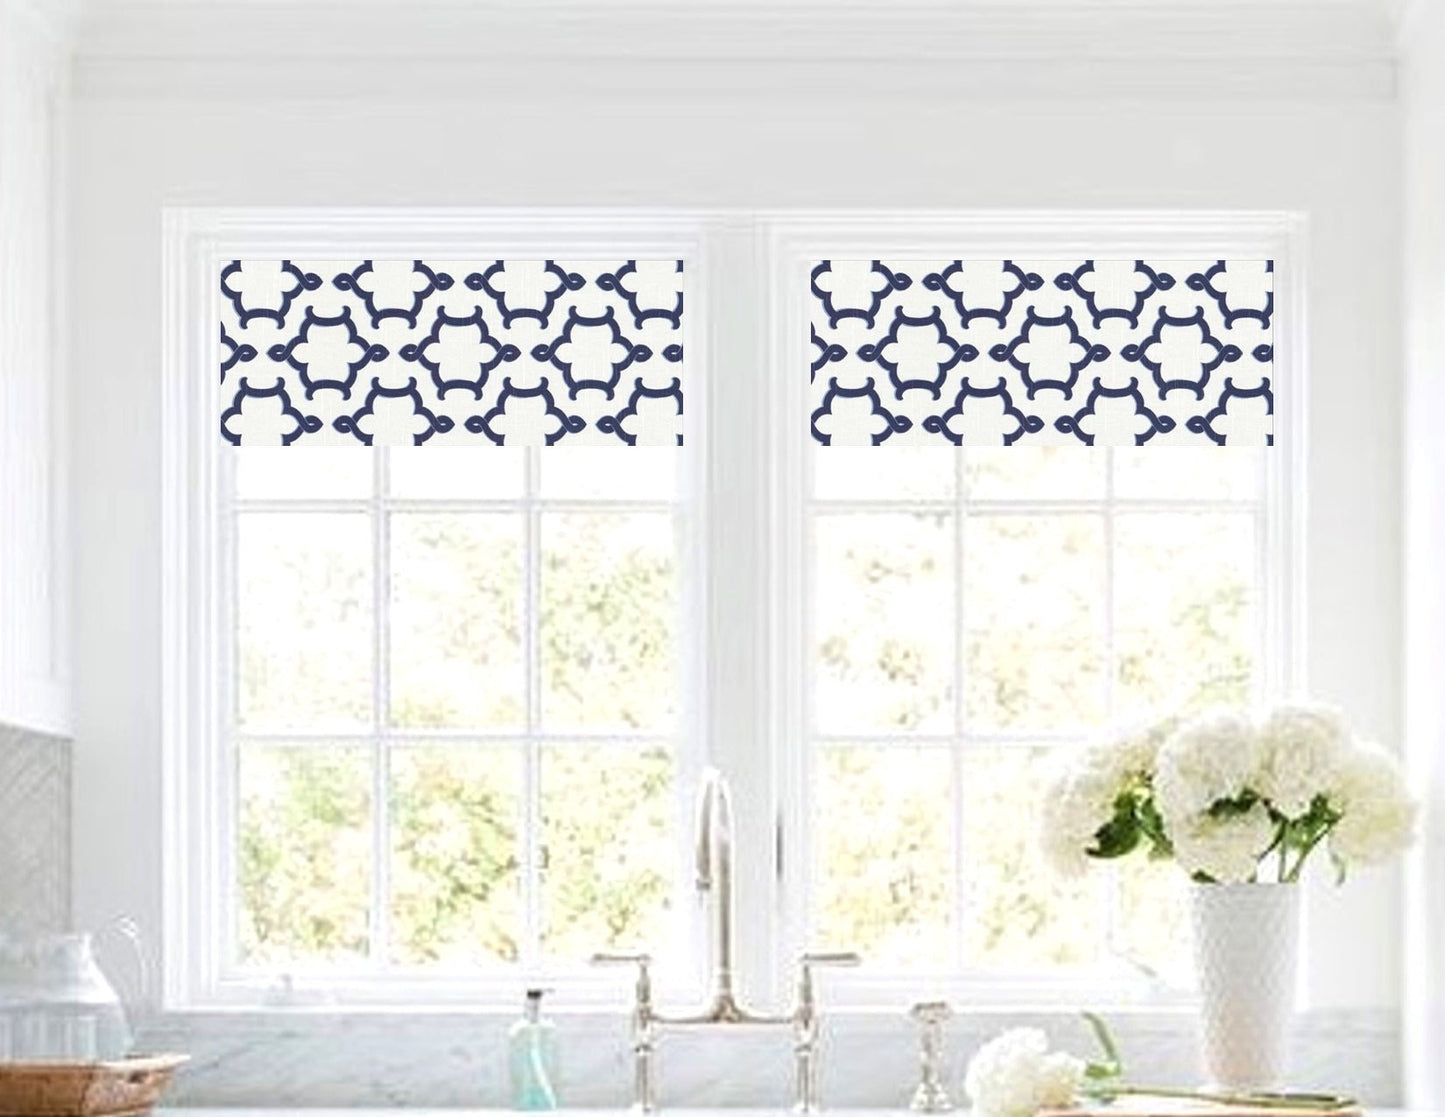 Straight Valance in Kasmir Blue and White Print, Custom Made, Fully Lined, 100% Cotton Fabric, Kitchen Window Curtains, Faux Linen